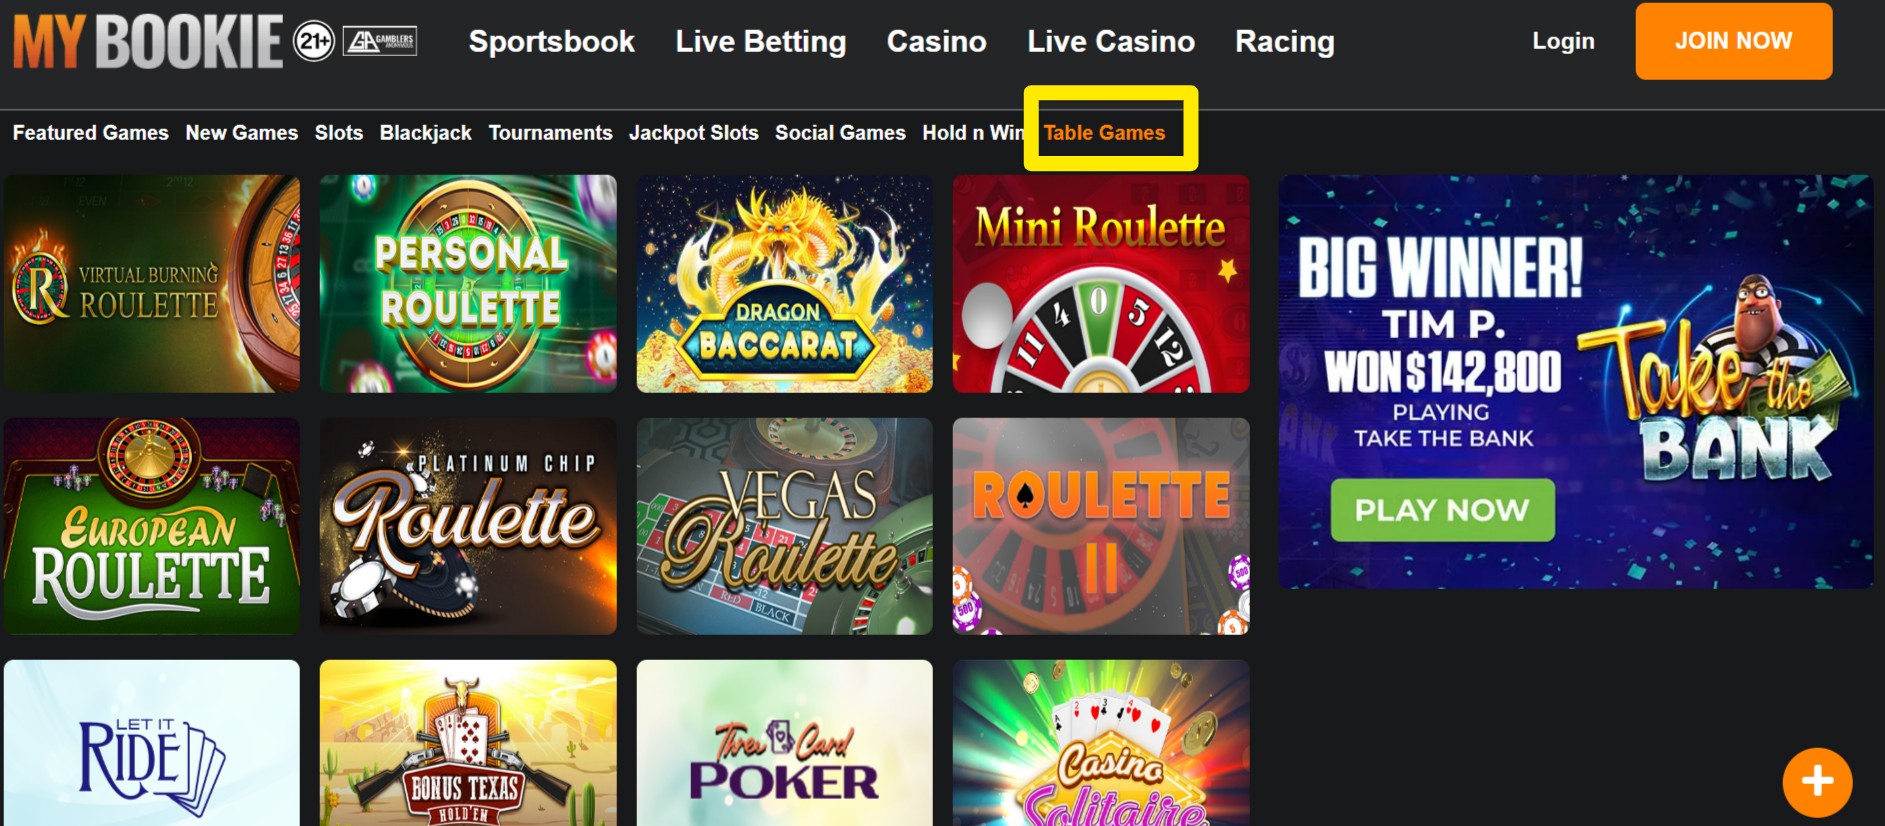 mybookie casino table games